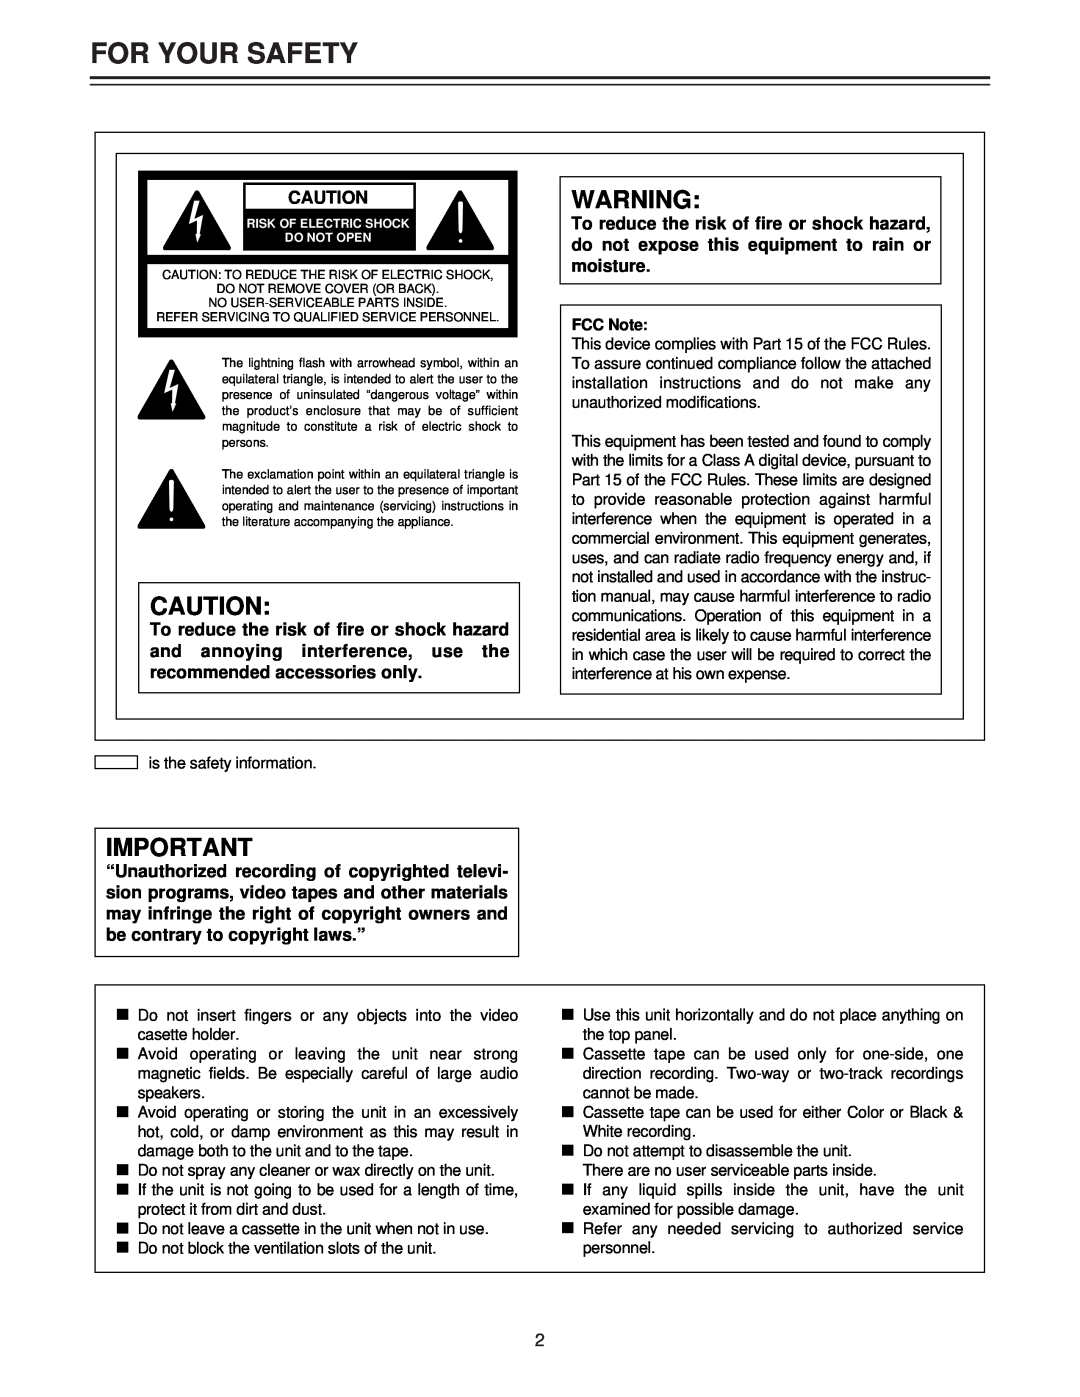 Panasonic AJ-LT85P manual For Your Safety, FCC Note 